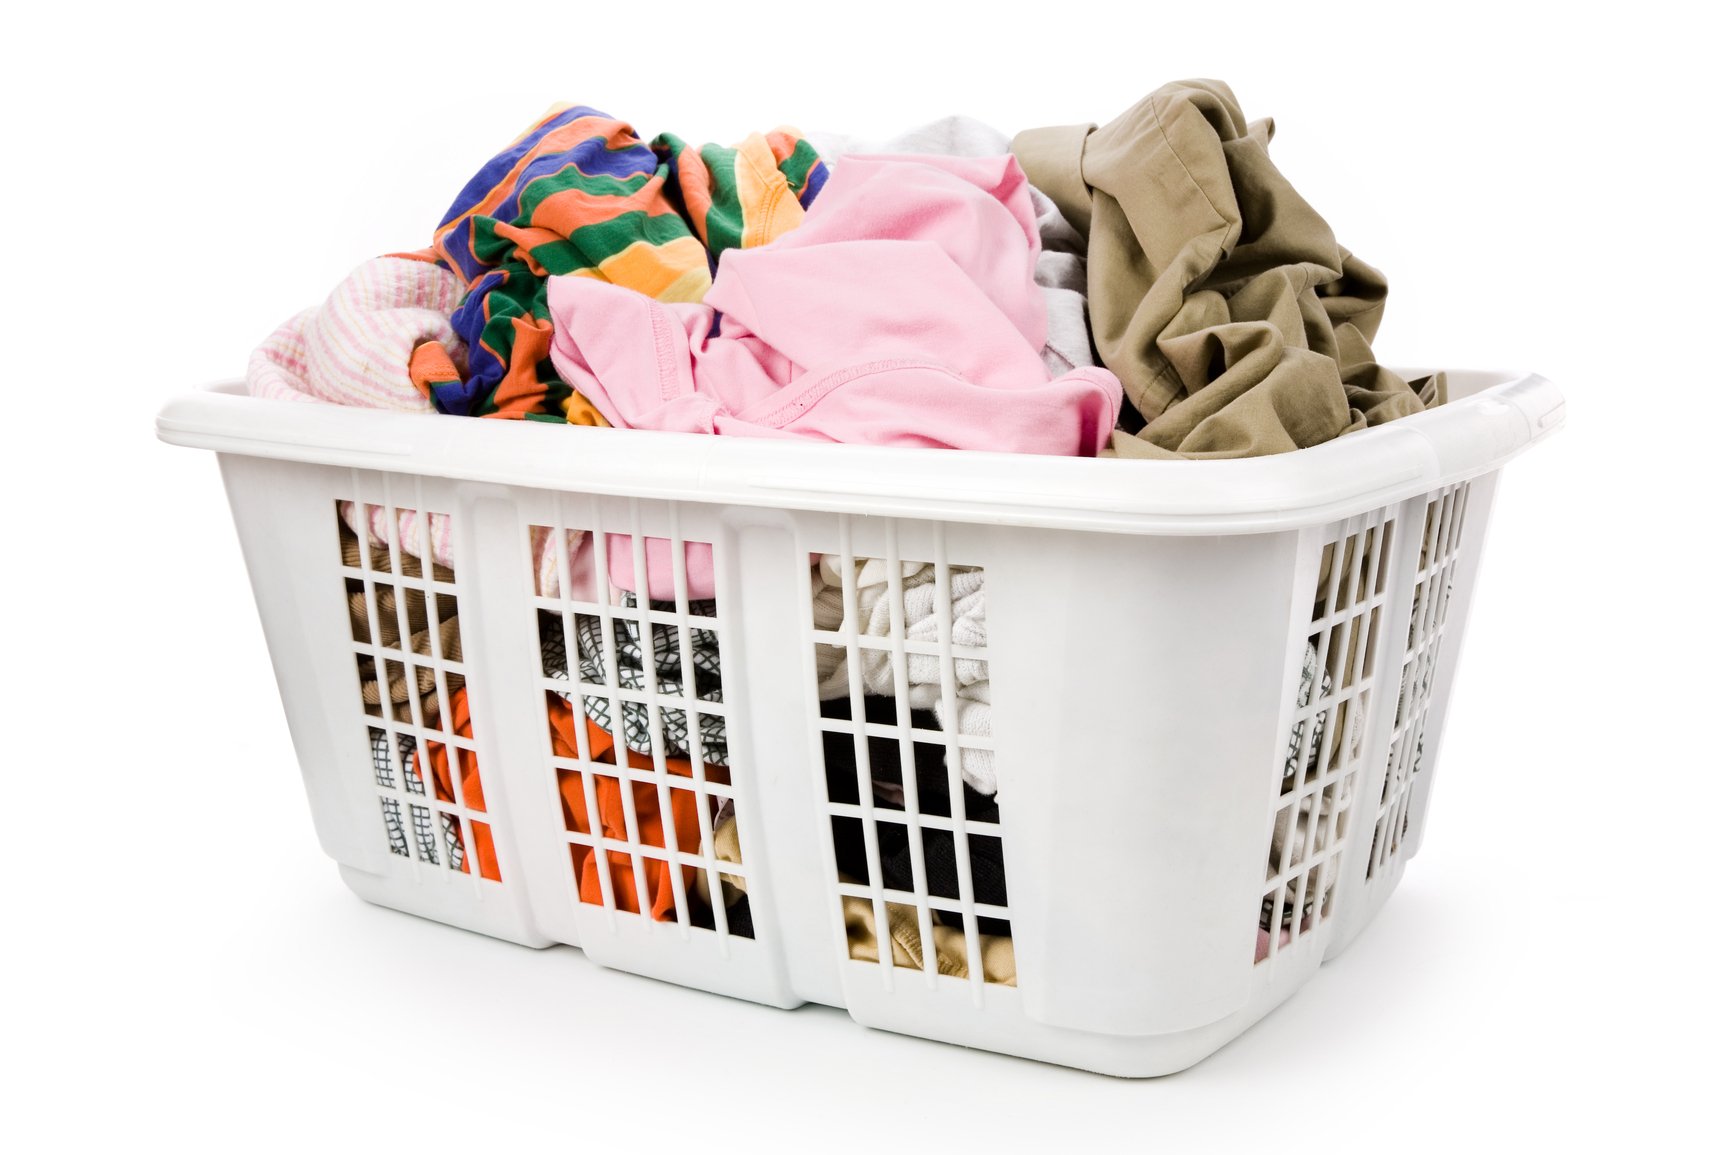 Грязная корзина 19. Laundry Hamper for Kids. Take Dirty clothes from the Hamper. Hamper stuffing Filler Red.